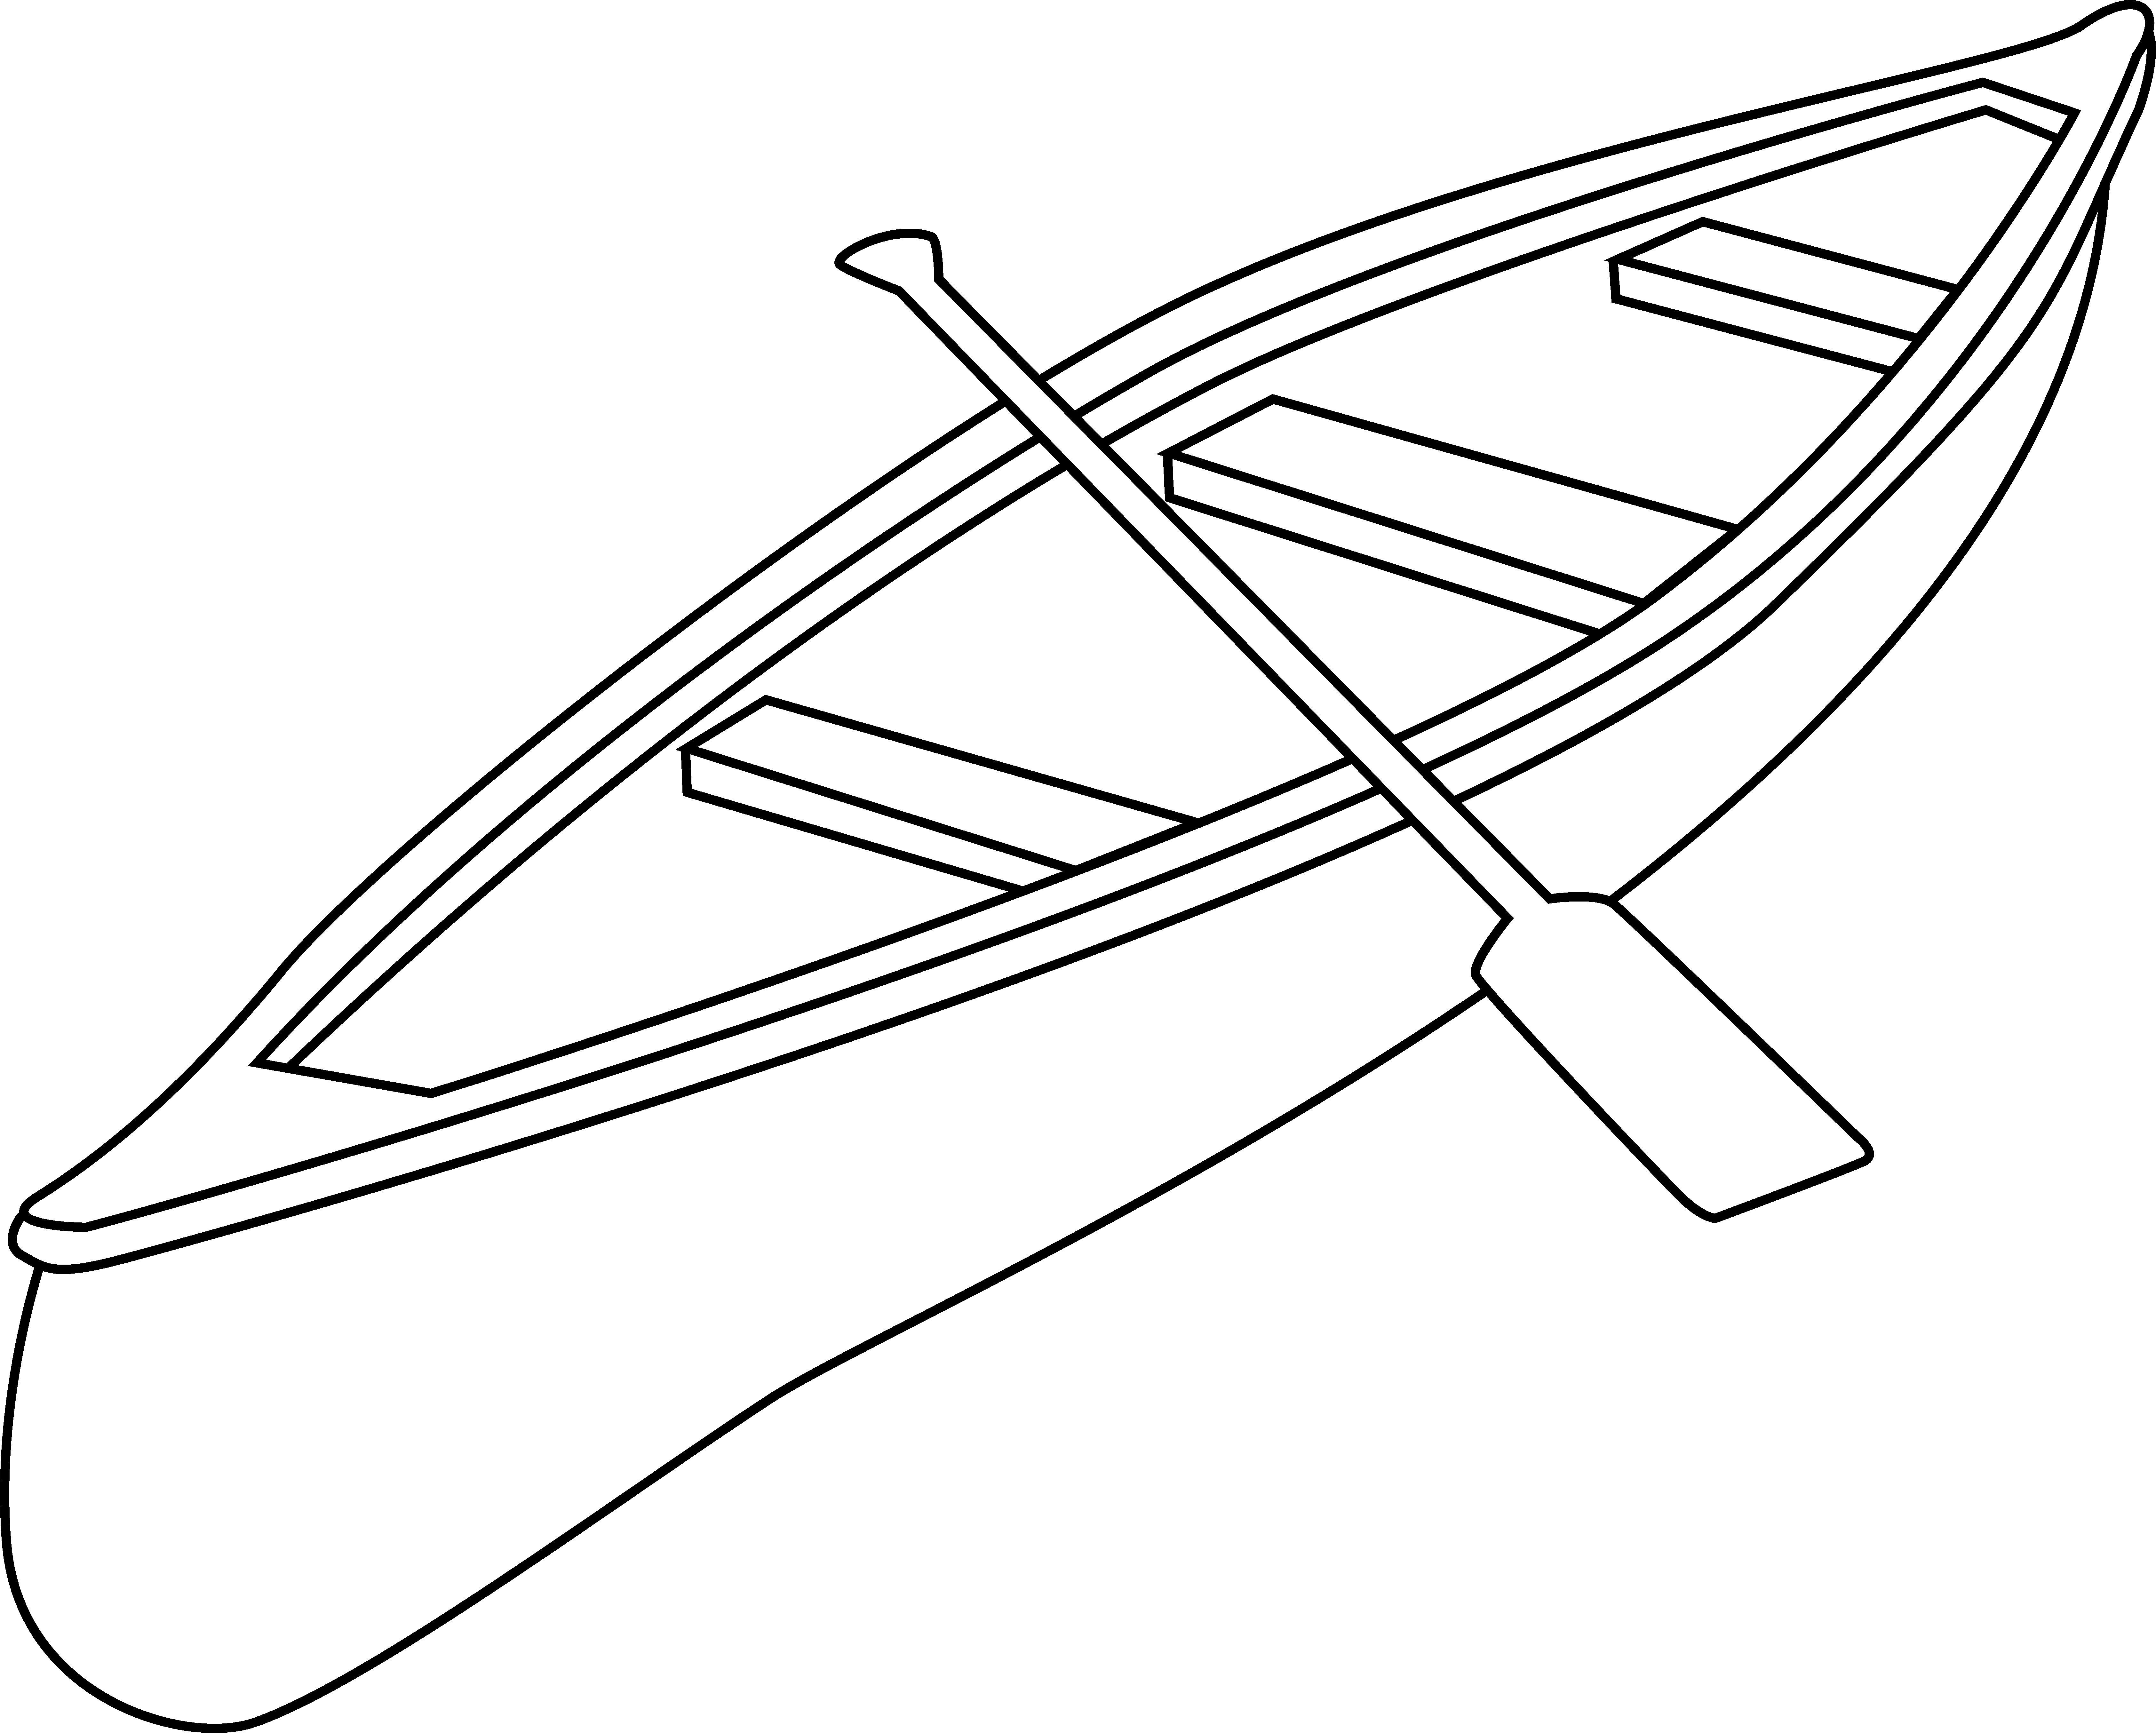  collection of canoe. Kayaking clipart pirogue